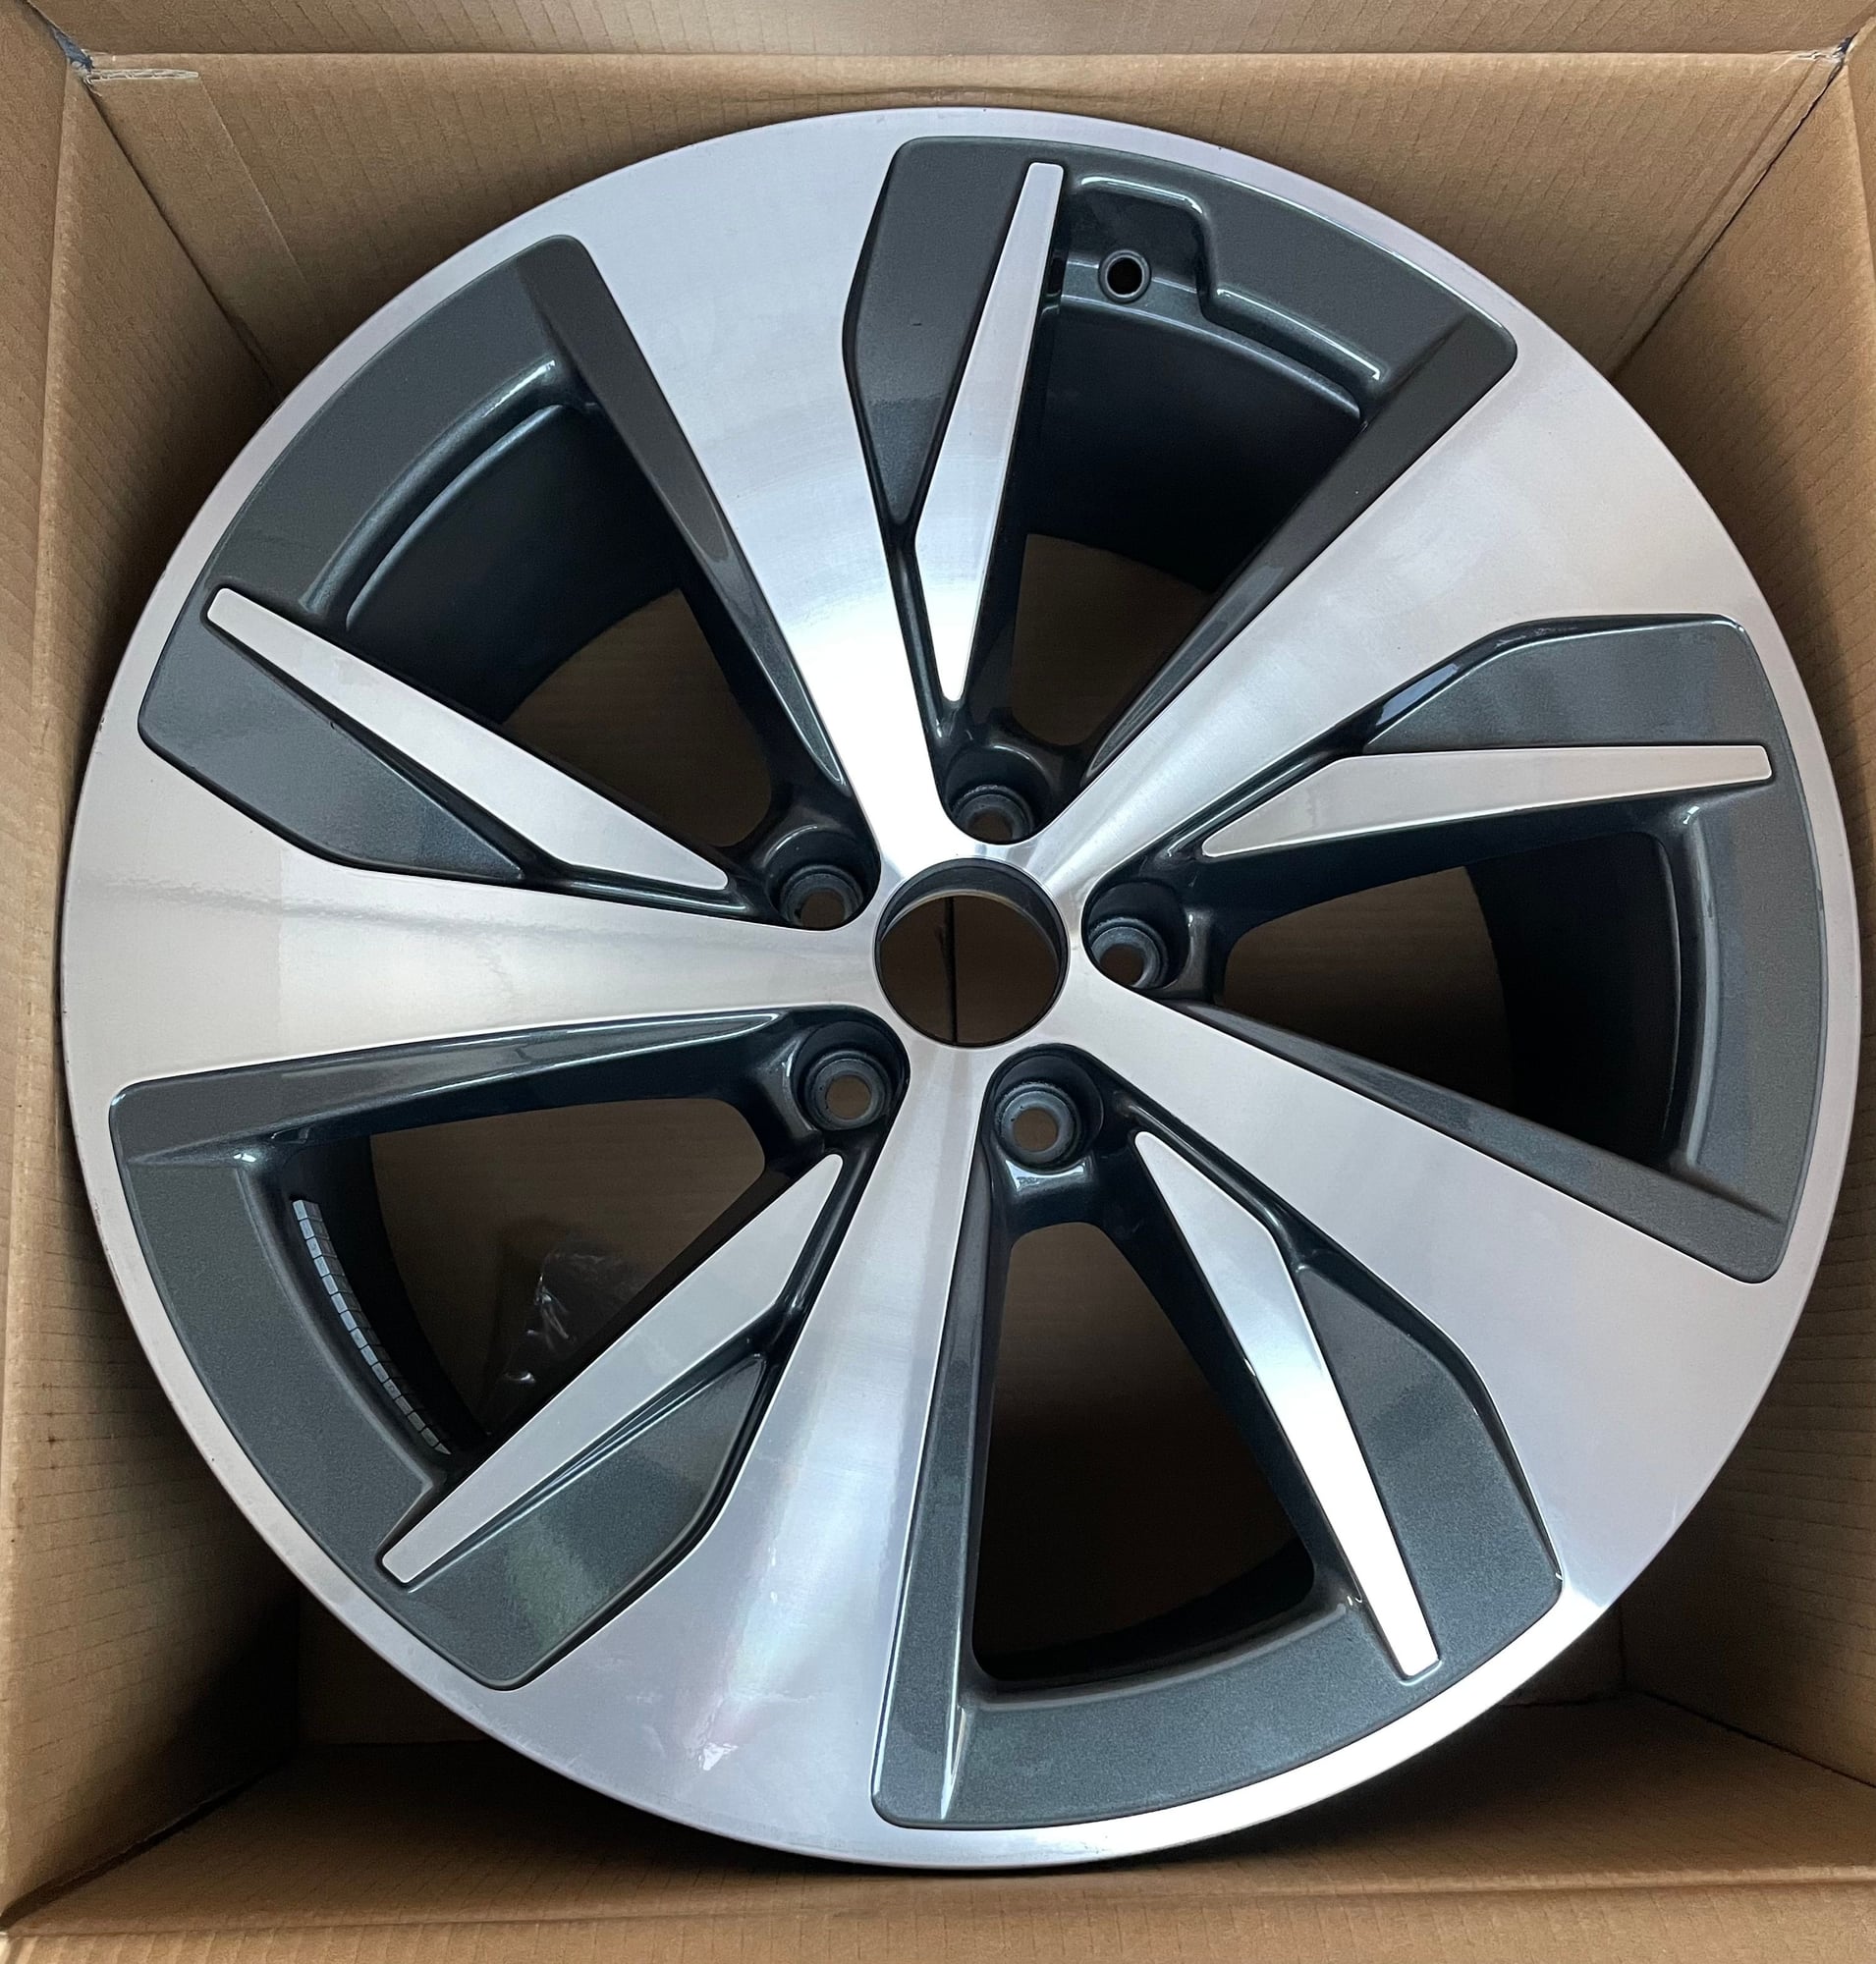 Wheels and Tires/Axles - 2024 20" Q8 e-tron OEM Wheels - Set of Factory Take offs (20x9, ET38) - Used - San Jose, CA 95124, United States